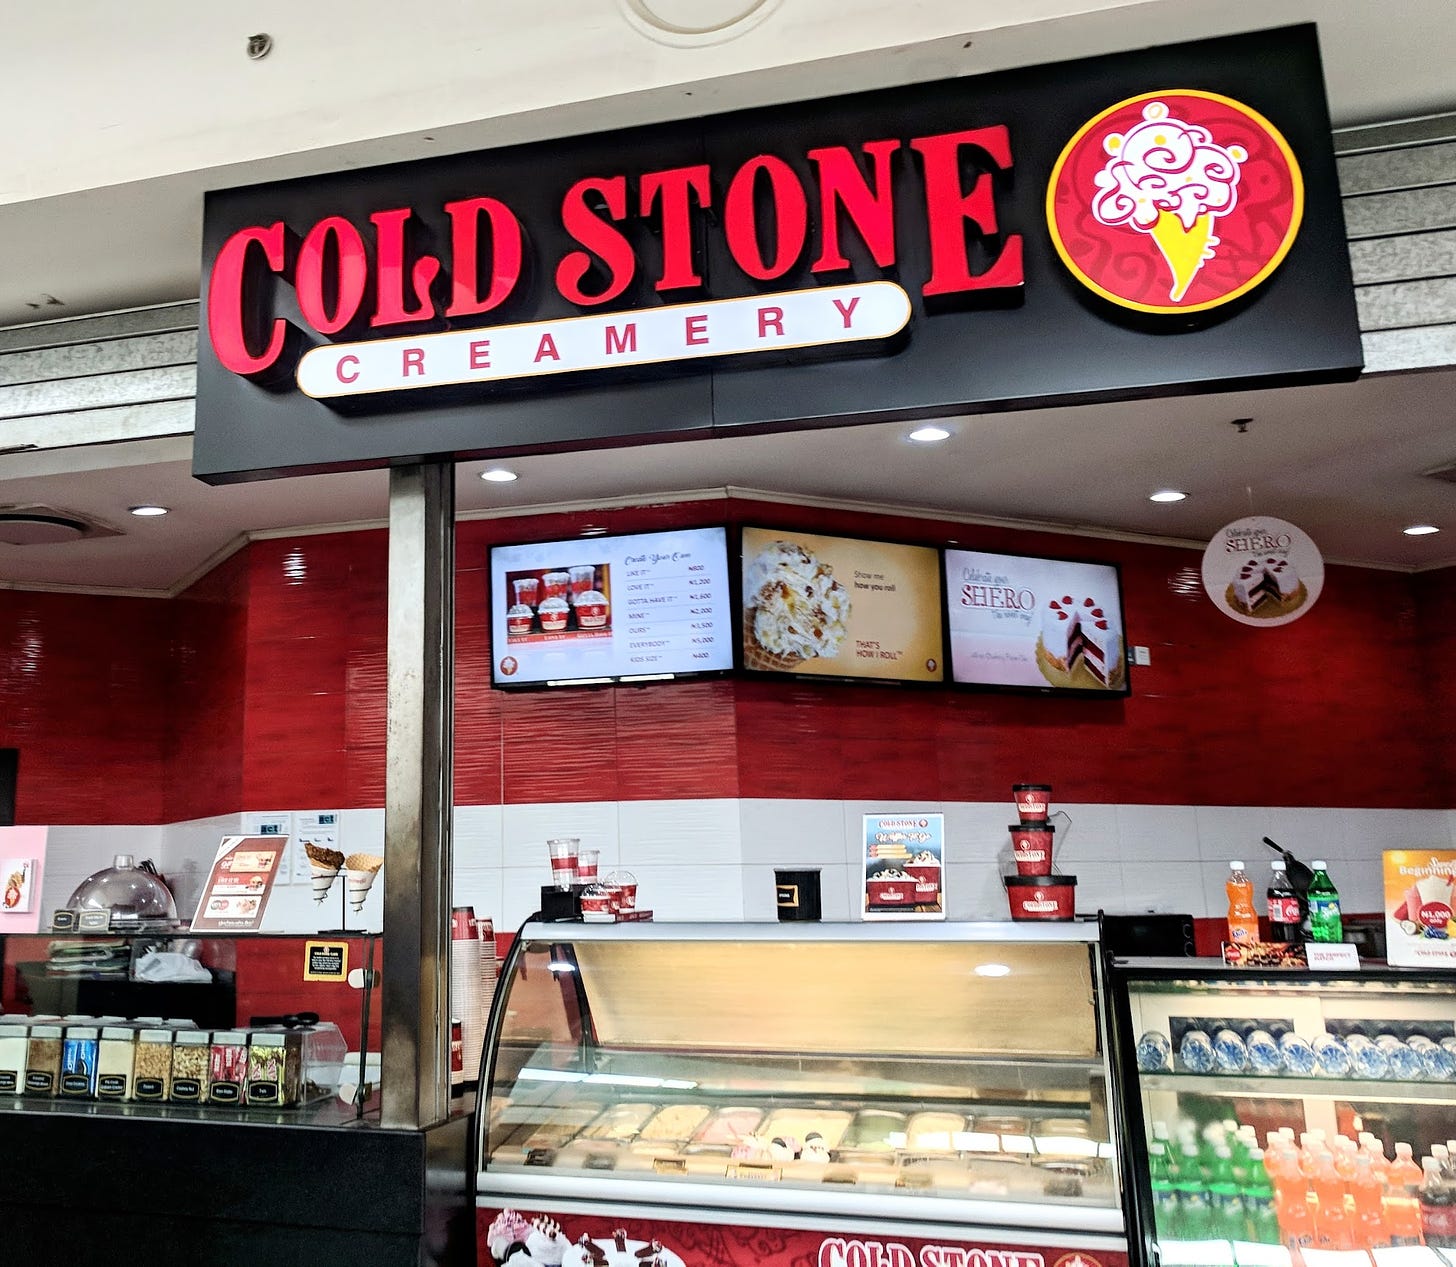 The front of a Cold Stone Creamery in a shopping mall